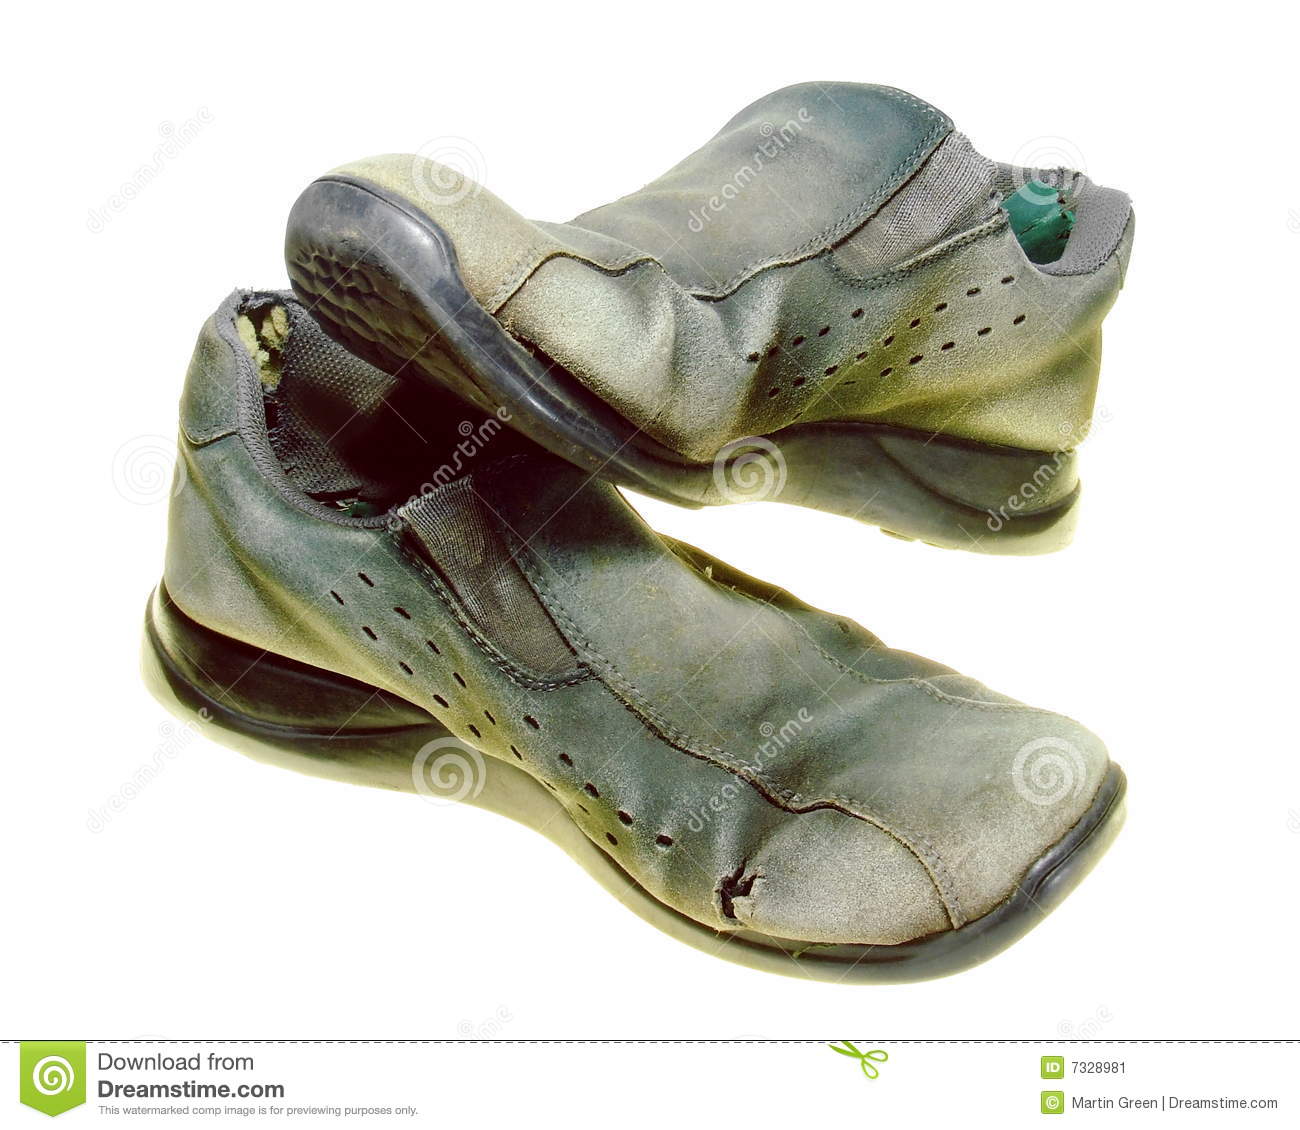 Old Shoes Stock Image   Image  7328981